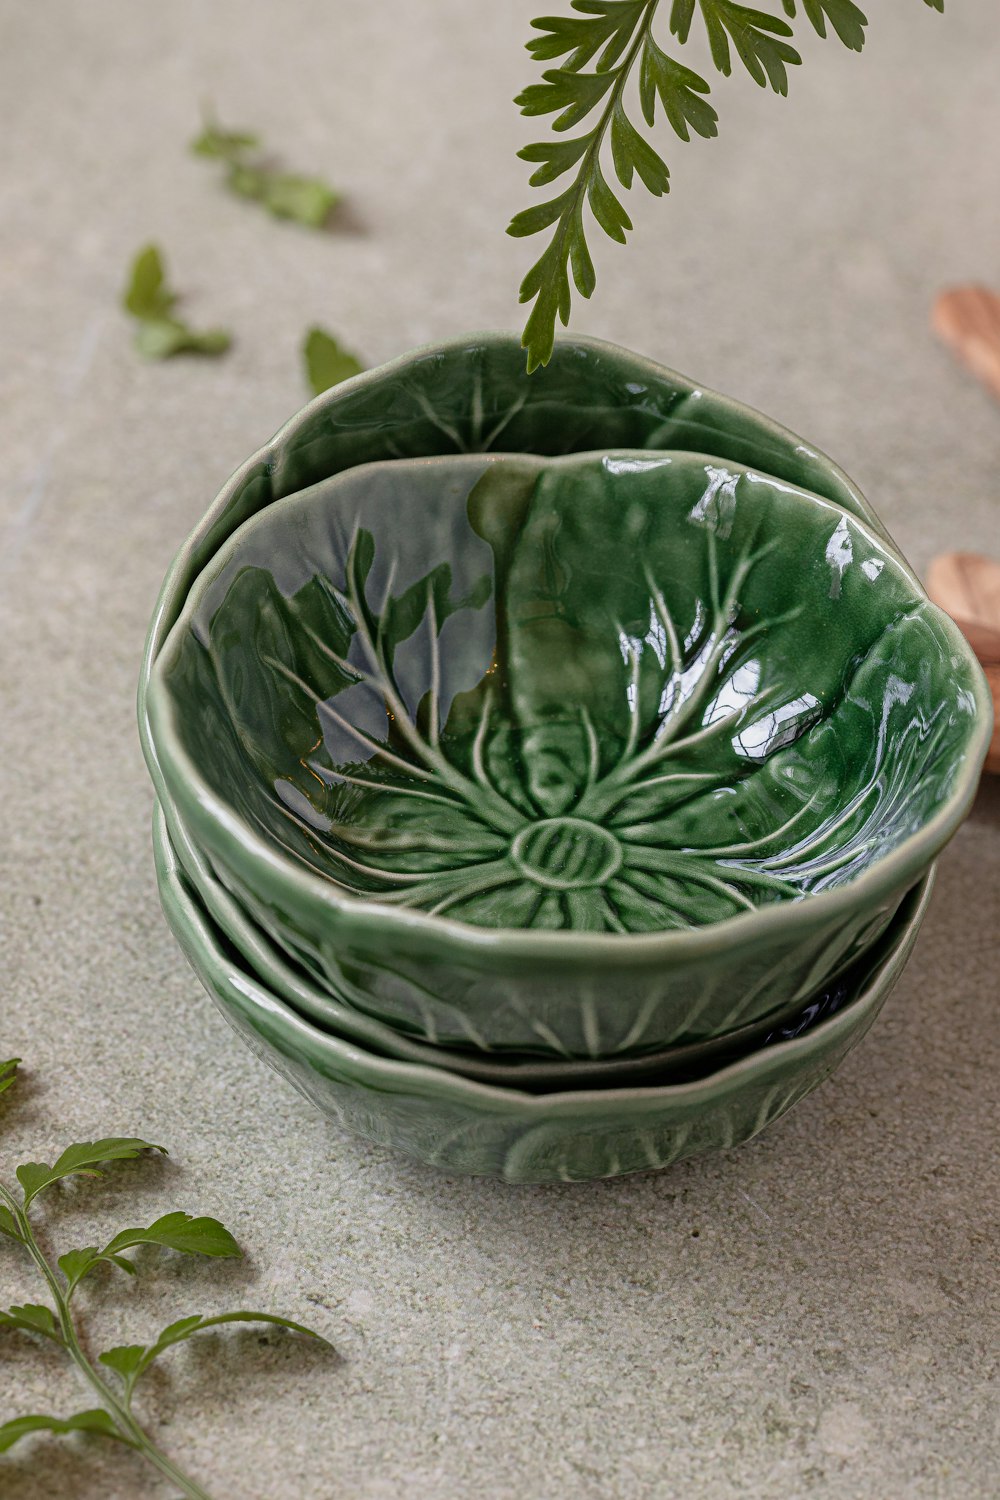 a close up of a bowl with a plant in it